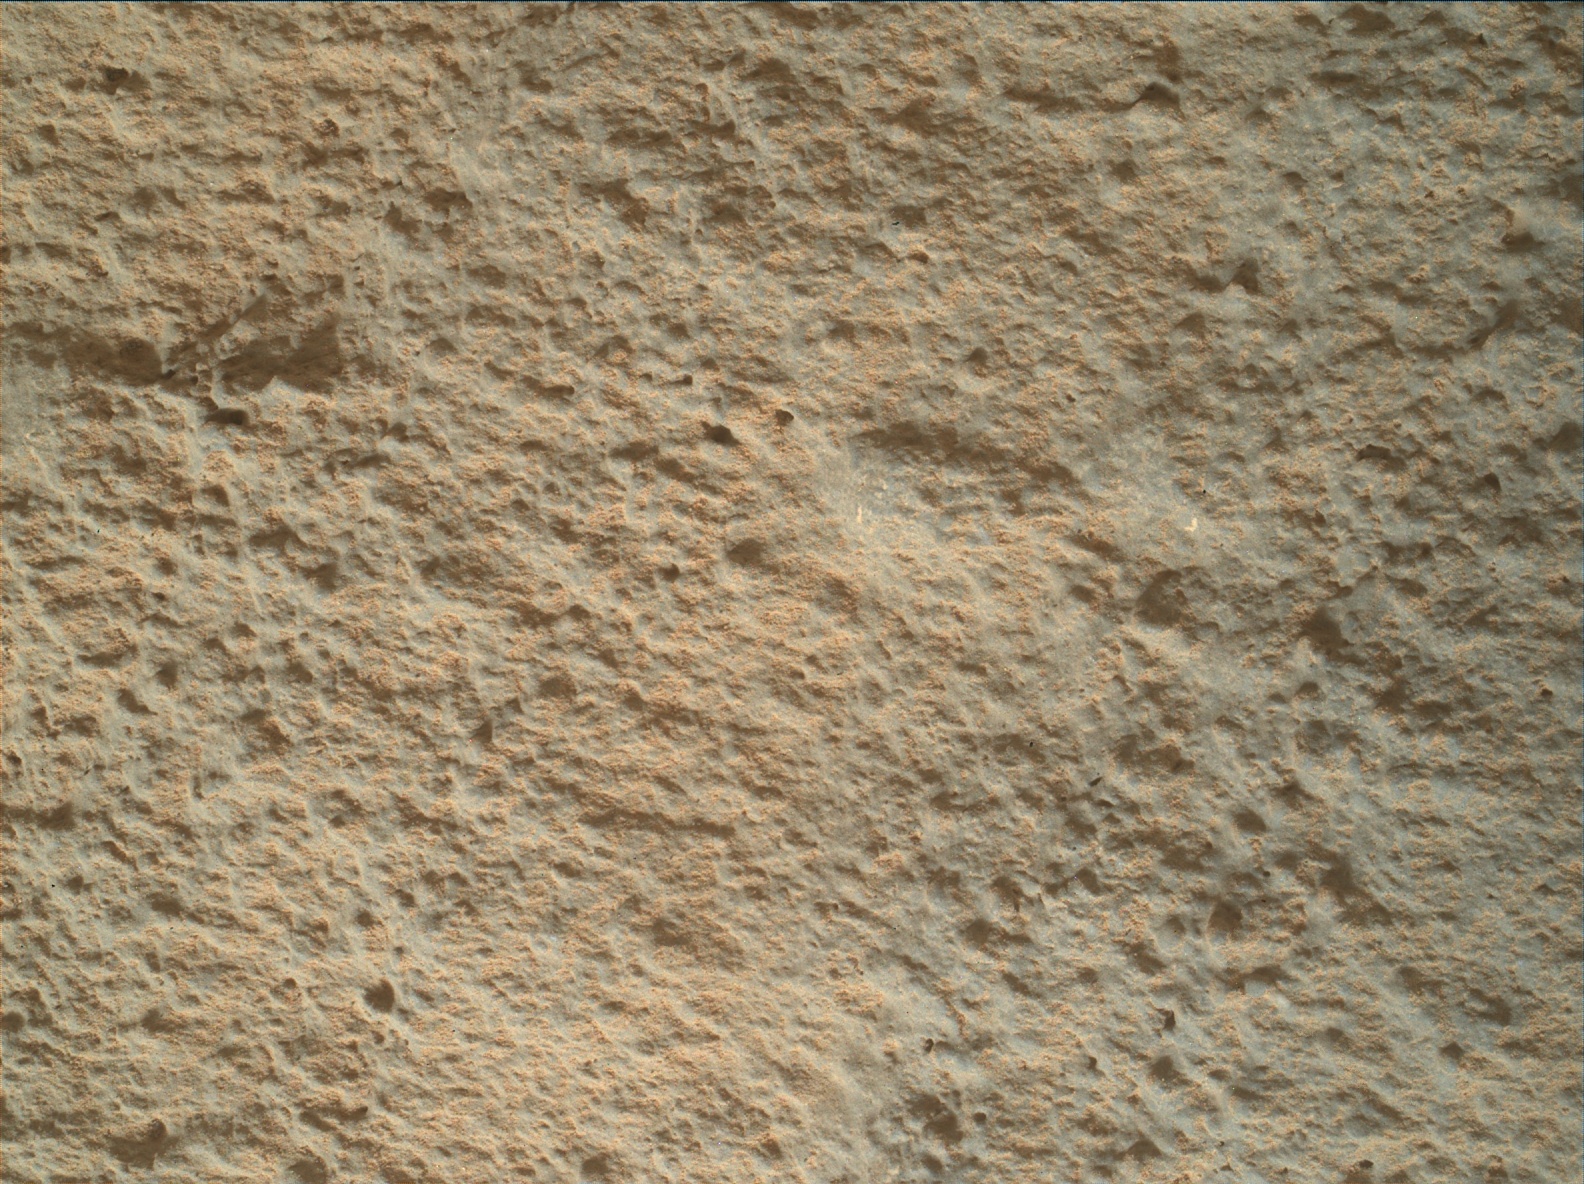 Nasa's Mars rover Curiosity acquired this image using its Mars Hand Lens Imager (MAHLI) on Sol 2700